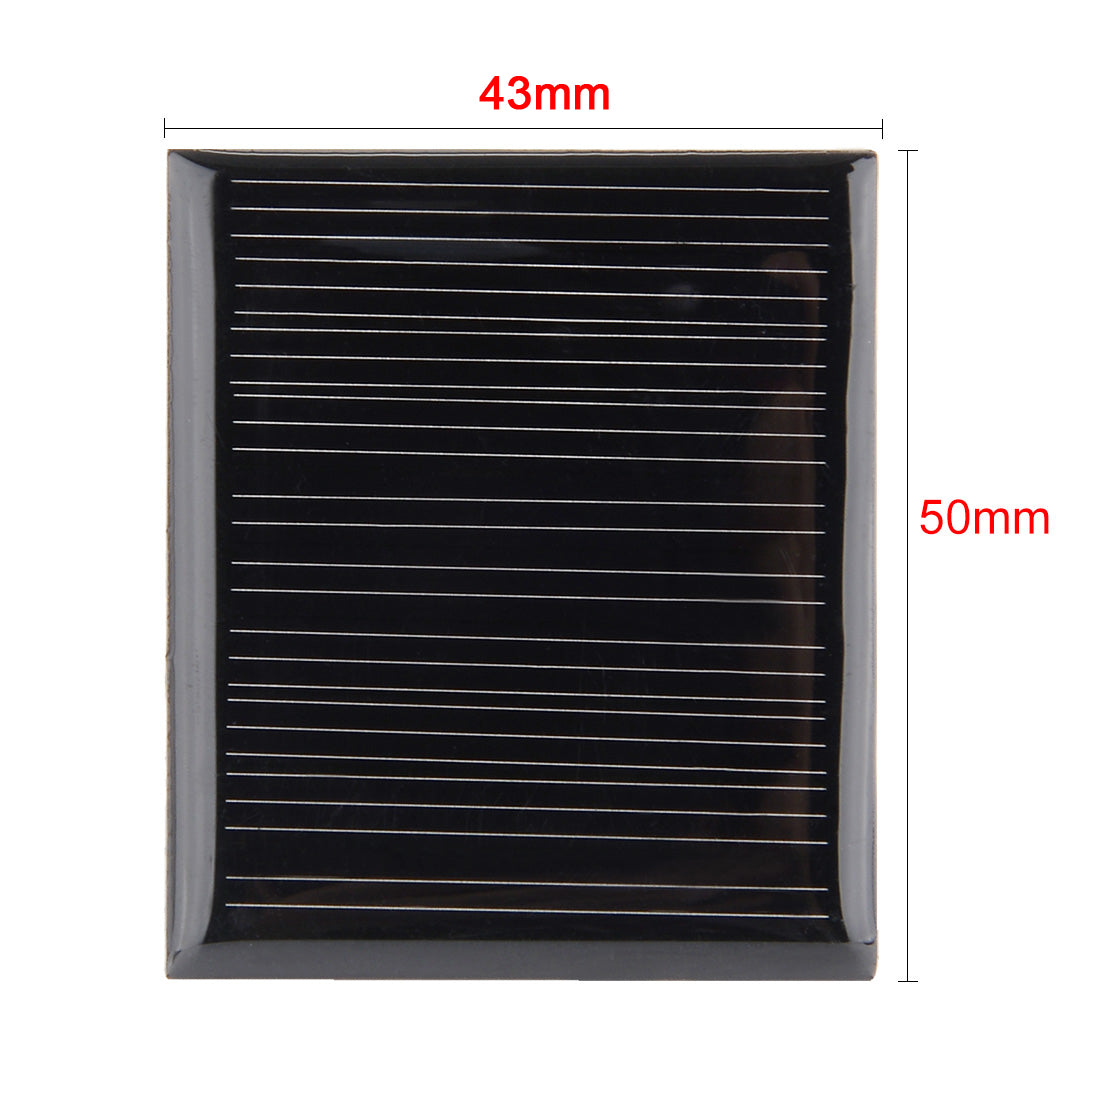 uxcell Uxcell 5Pcs 5V 60mA Poly Mini Solar Cell Panel Module DIY for Phone Light Toys Charger 50mm x 43mm